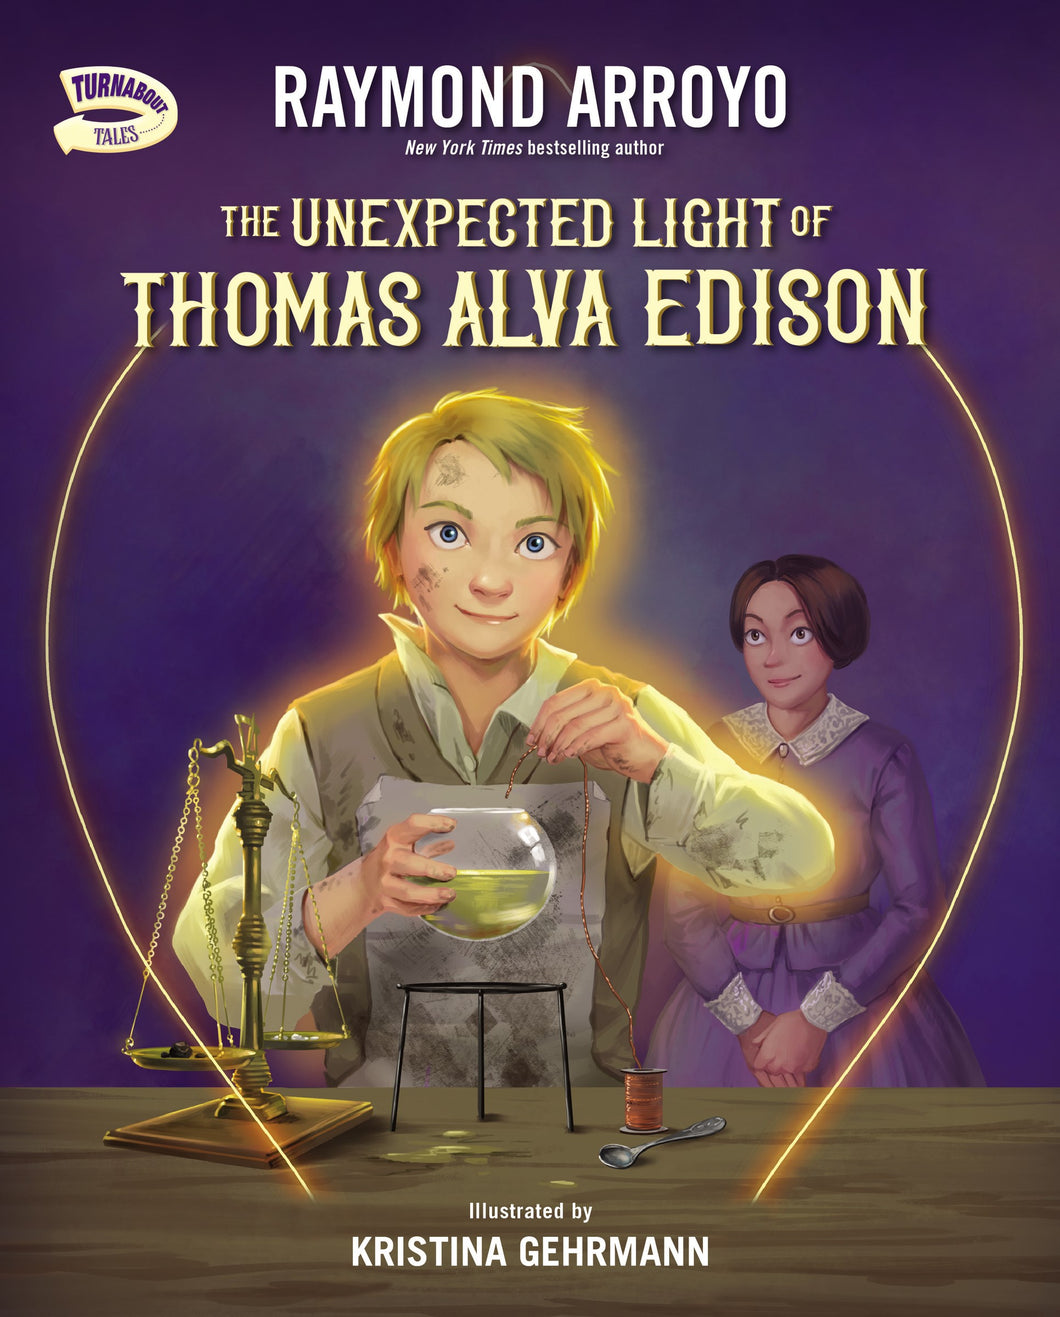 The Unexpected Light Of Thomas Alva Edison (Turnabout Tales)